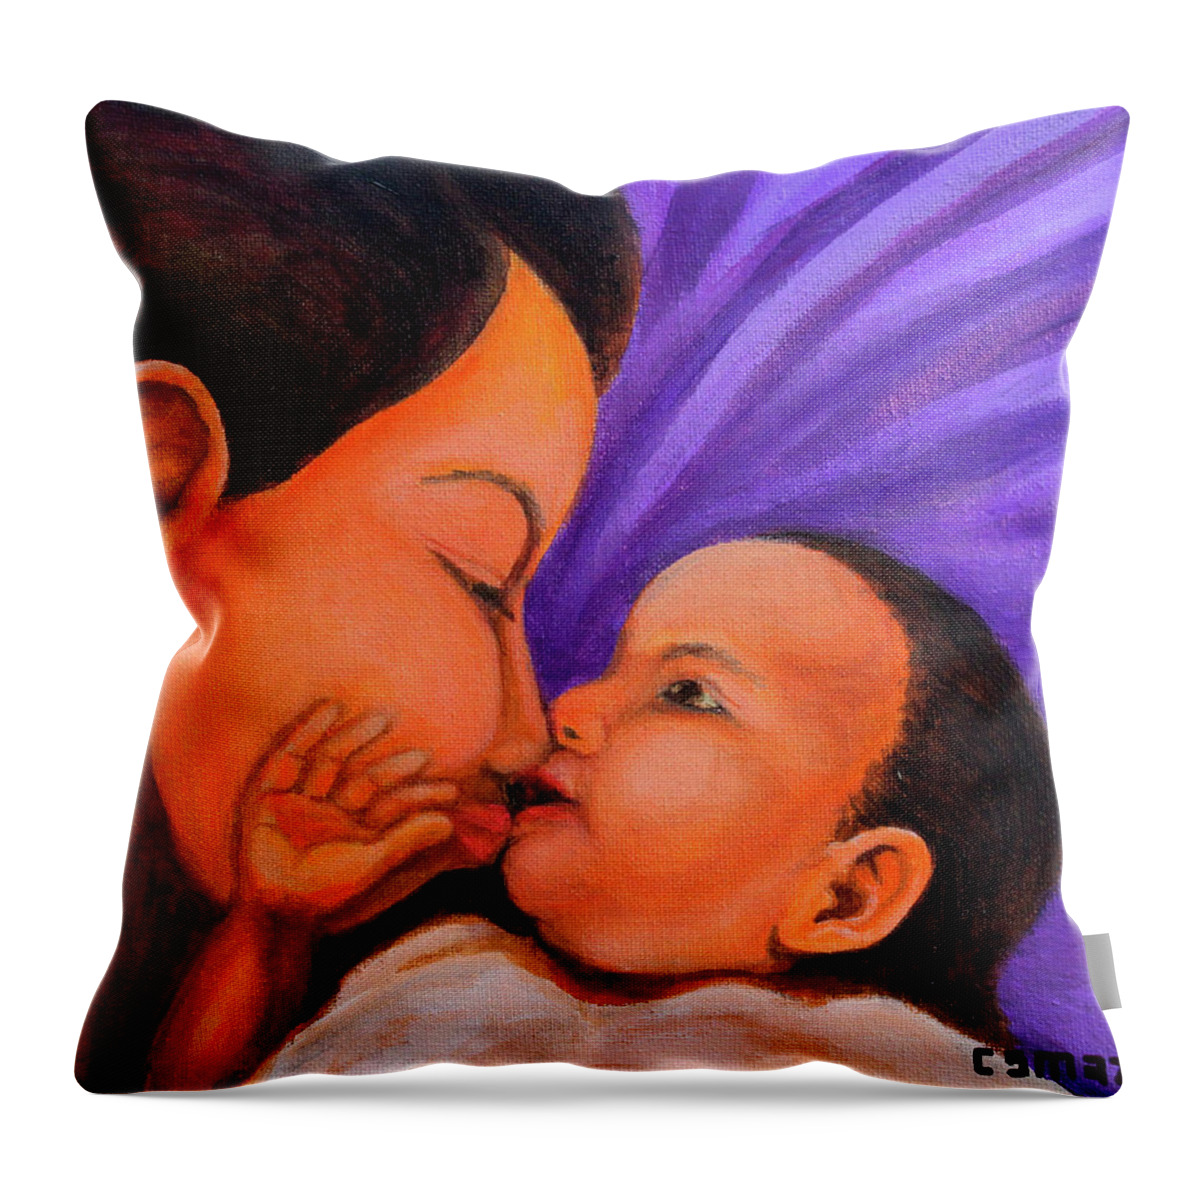 Mother Throw Pillow featuring the painting Mother's Love by Cyril Maza